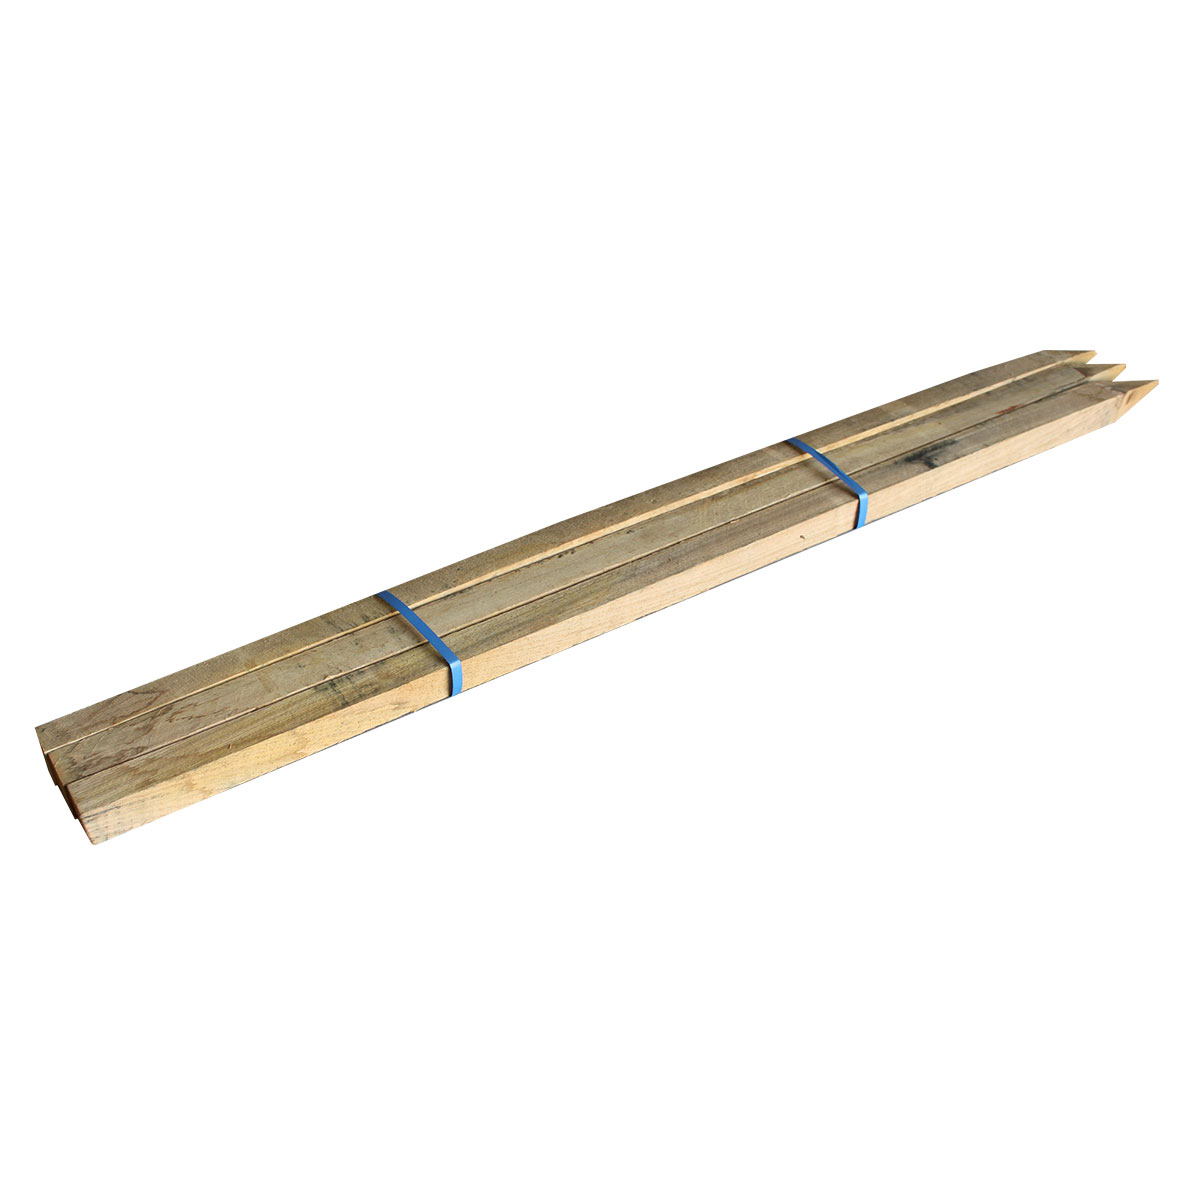 Hardwood Stakes 50 x 50 x 1800mm - 3 Pack